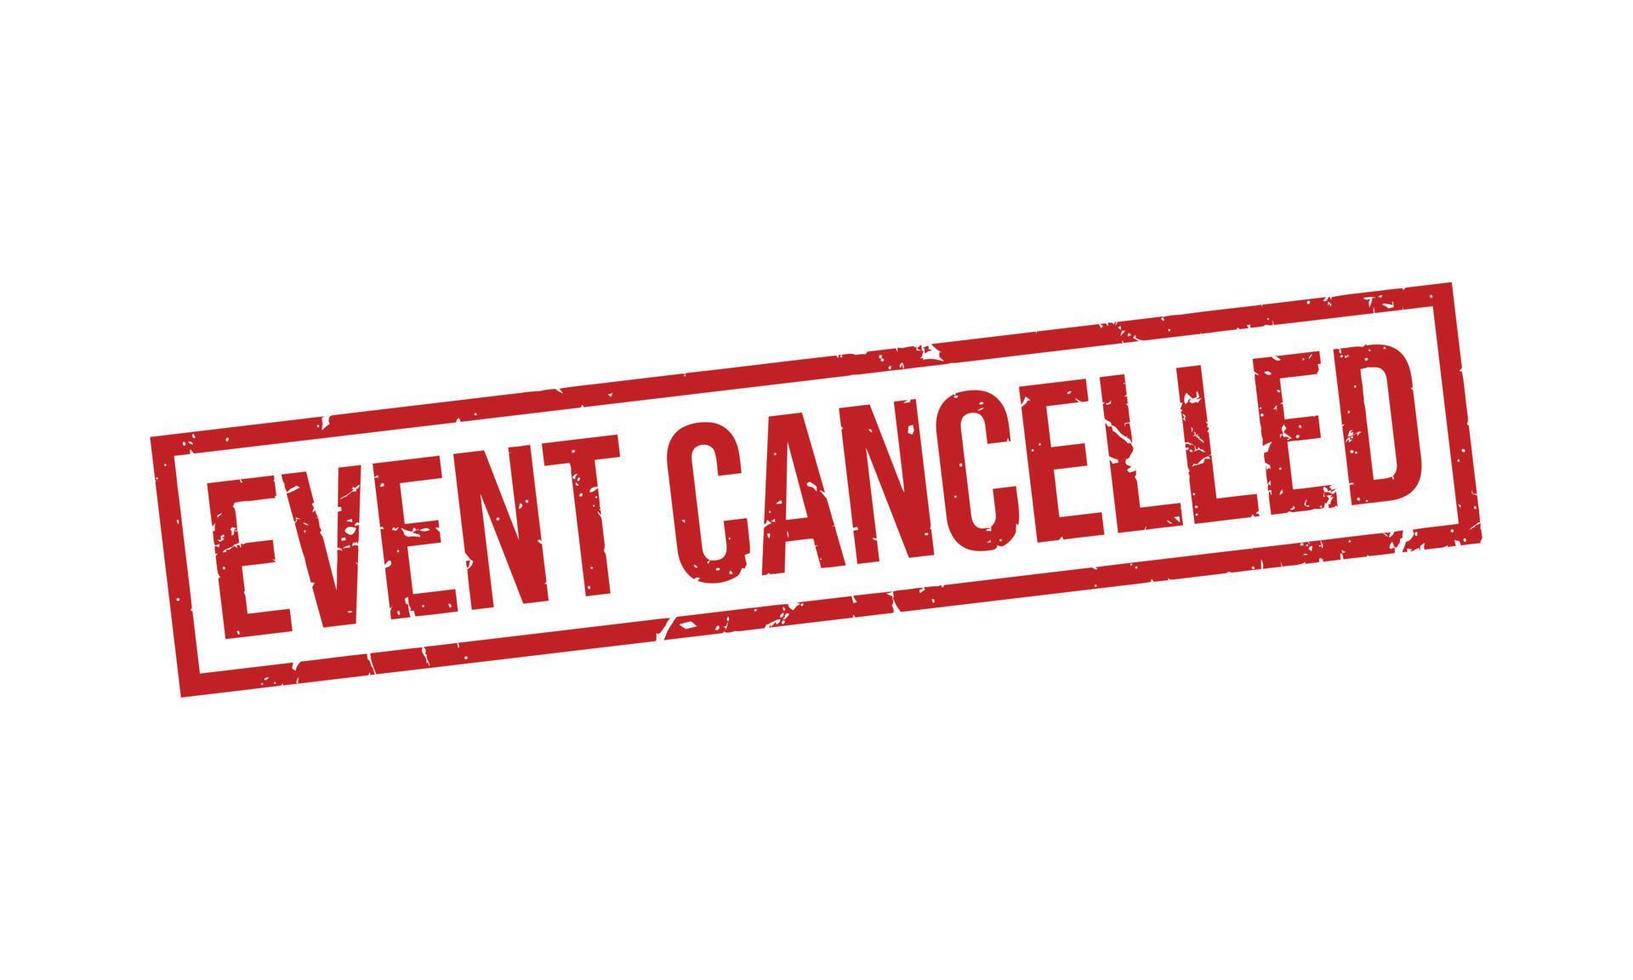 Event Cancelled Rubber Stamp Seal Vector